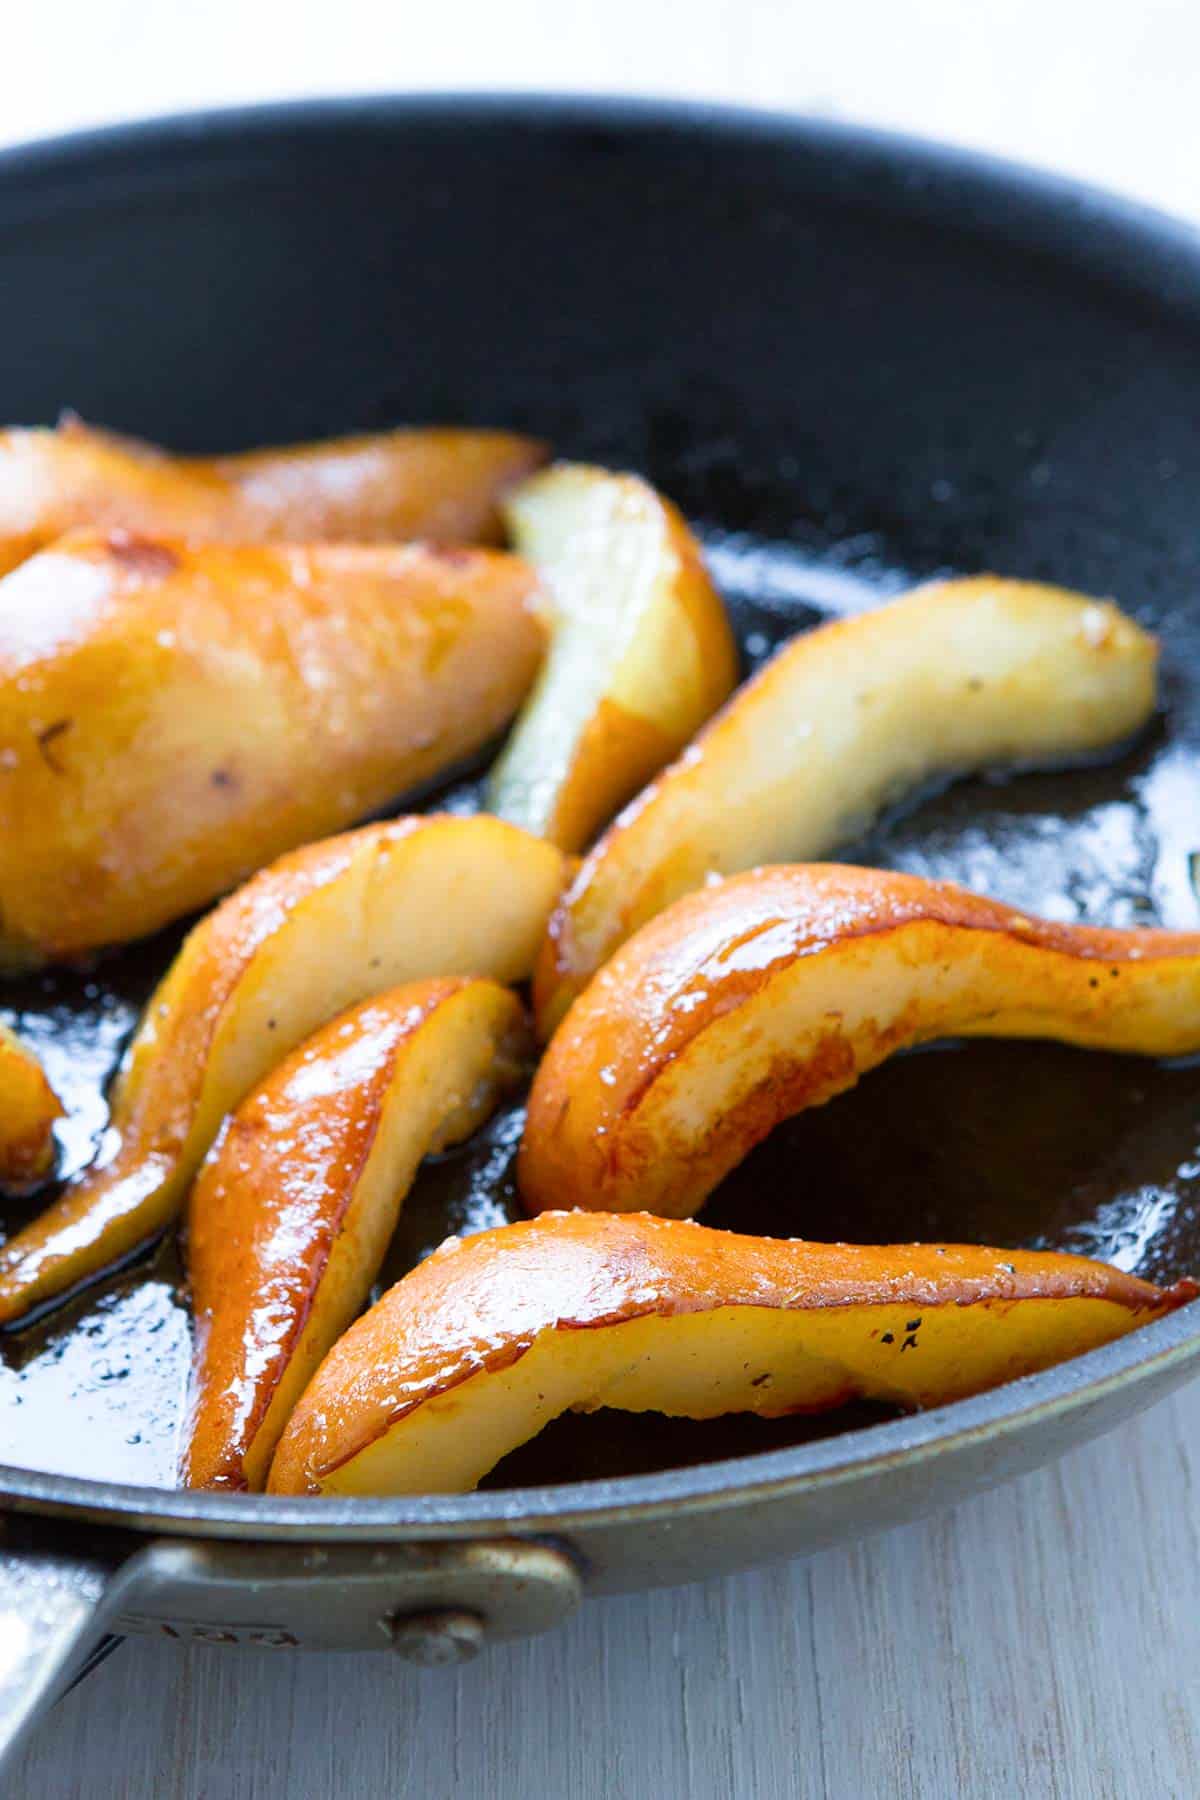 Golden brown pear slices, glazed with maple syrup, in a nonstick skillet.